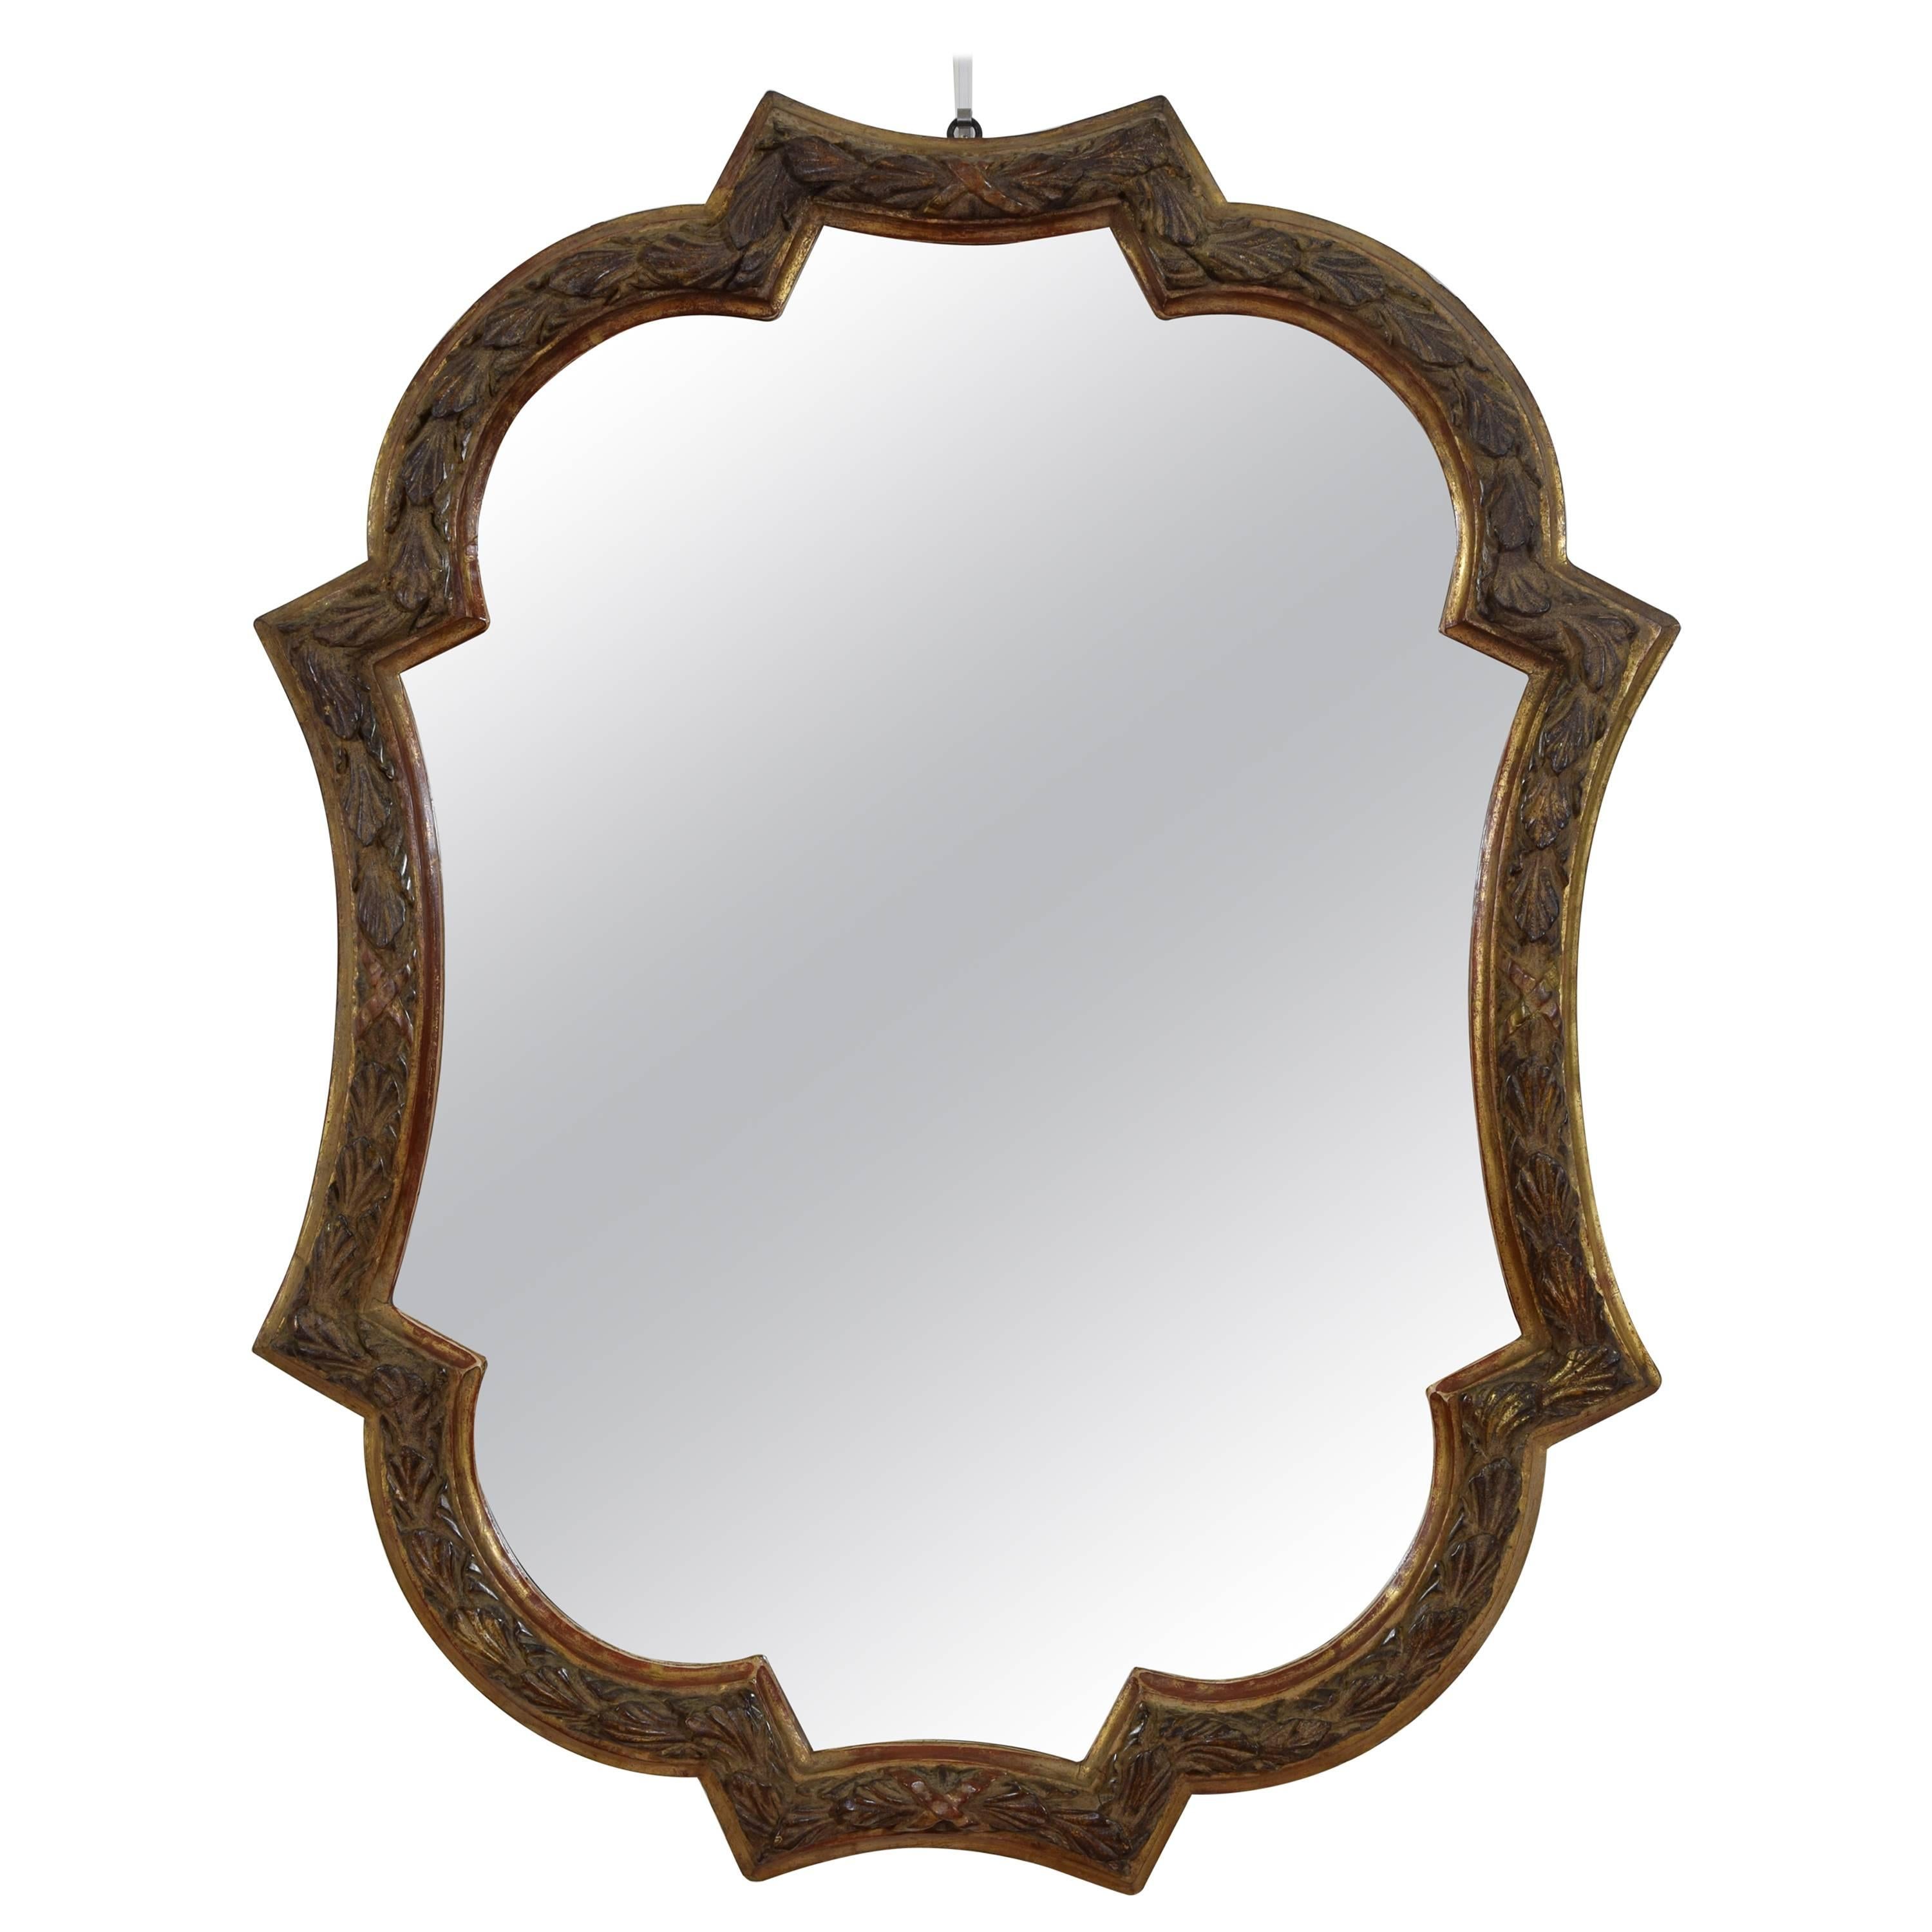 Italian Carved Giltwood Rococo Style Wall Mirror, 19th Century